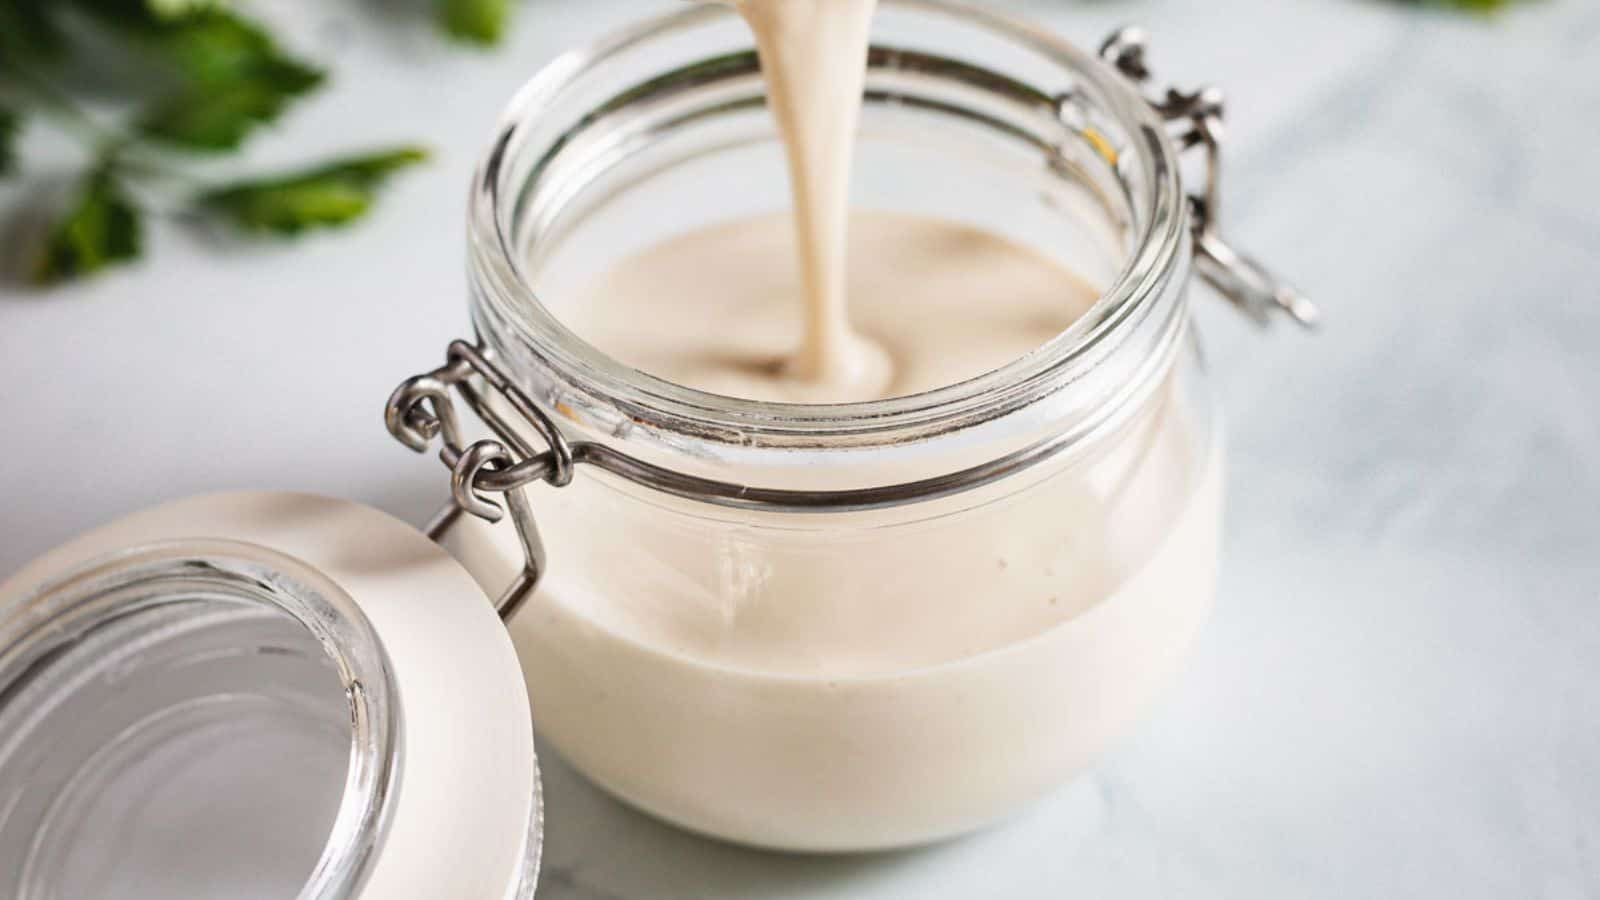 A jar with a white sauce pouring out of it.